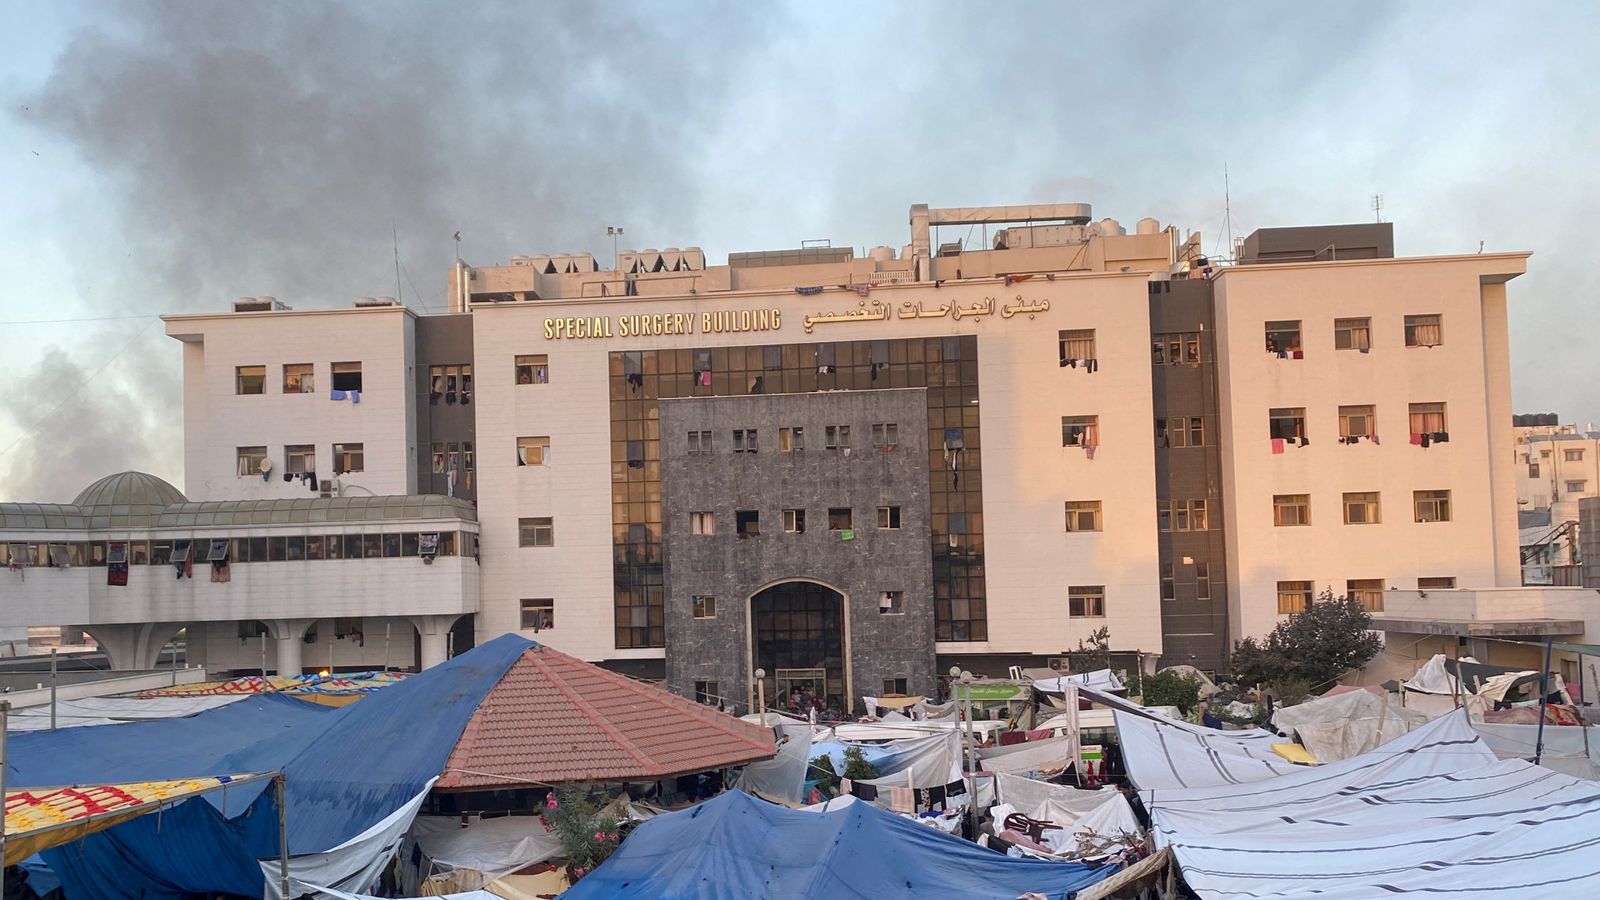 Israel-Hamas war: What protection do hospitals have in wartime and how does that apply in Gaza?